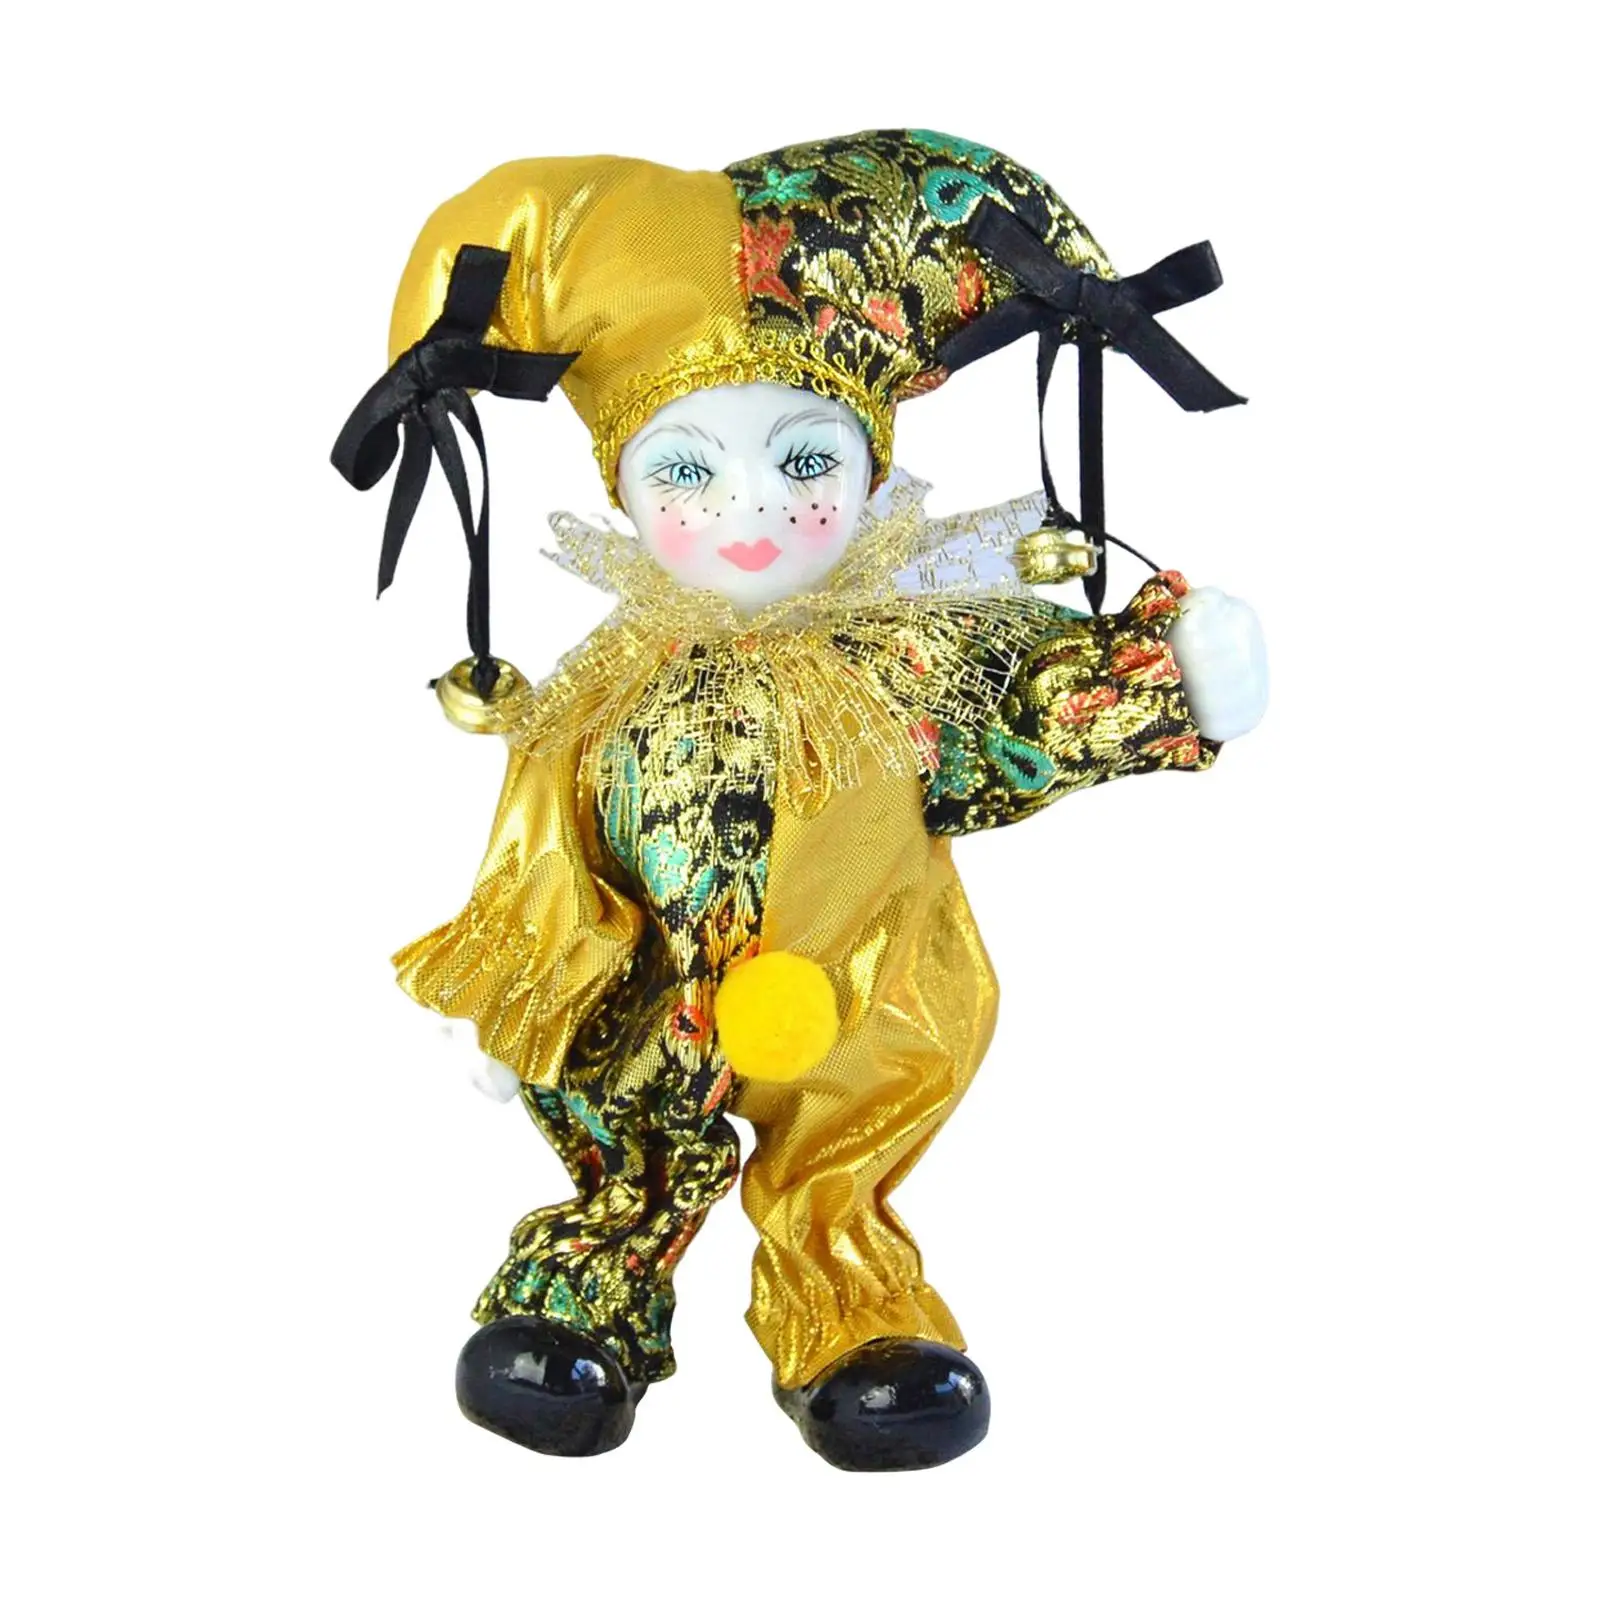 Triangel Doll with Outfits Display Ornament Home Decoration Small Clown Doll Arts for Holiday Valentin Gift Kids Toy Collections